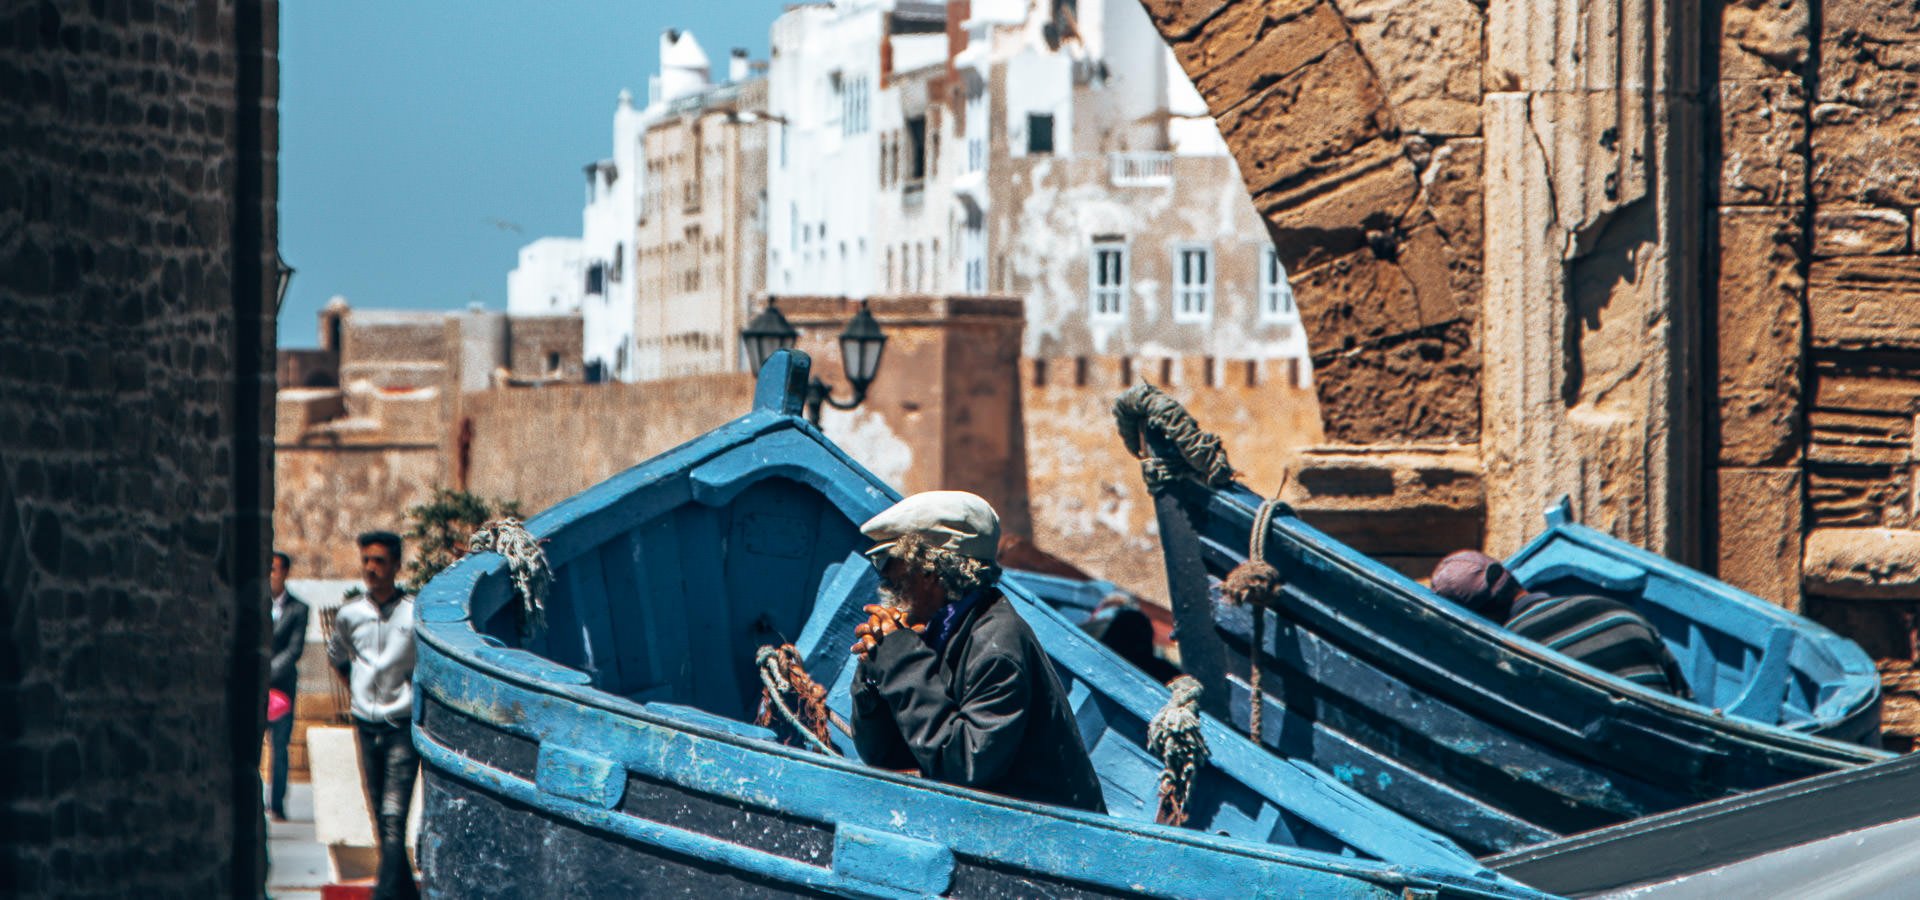 Your Complete Travel Guide To Essaouira, Morocco | road trip 4